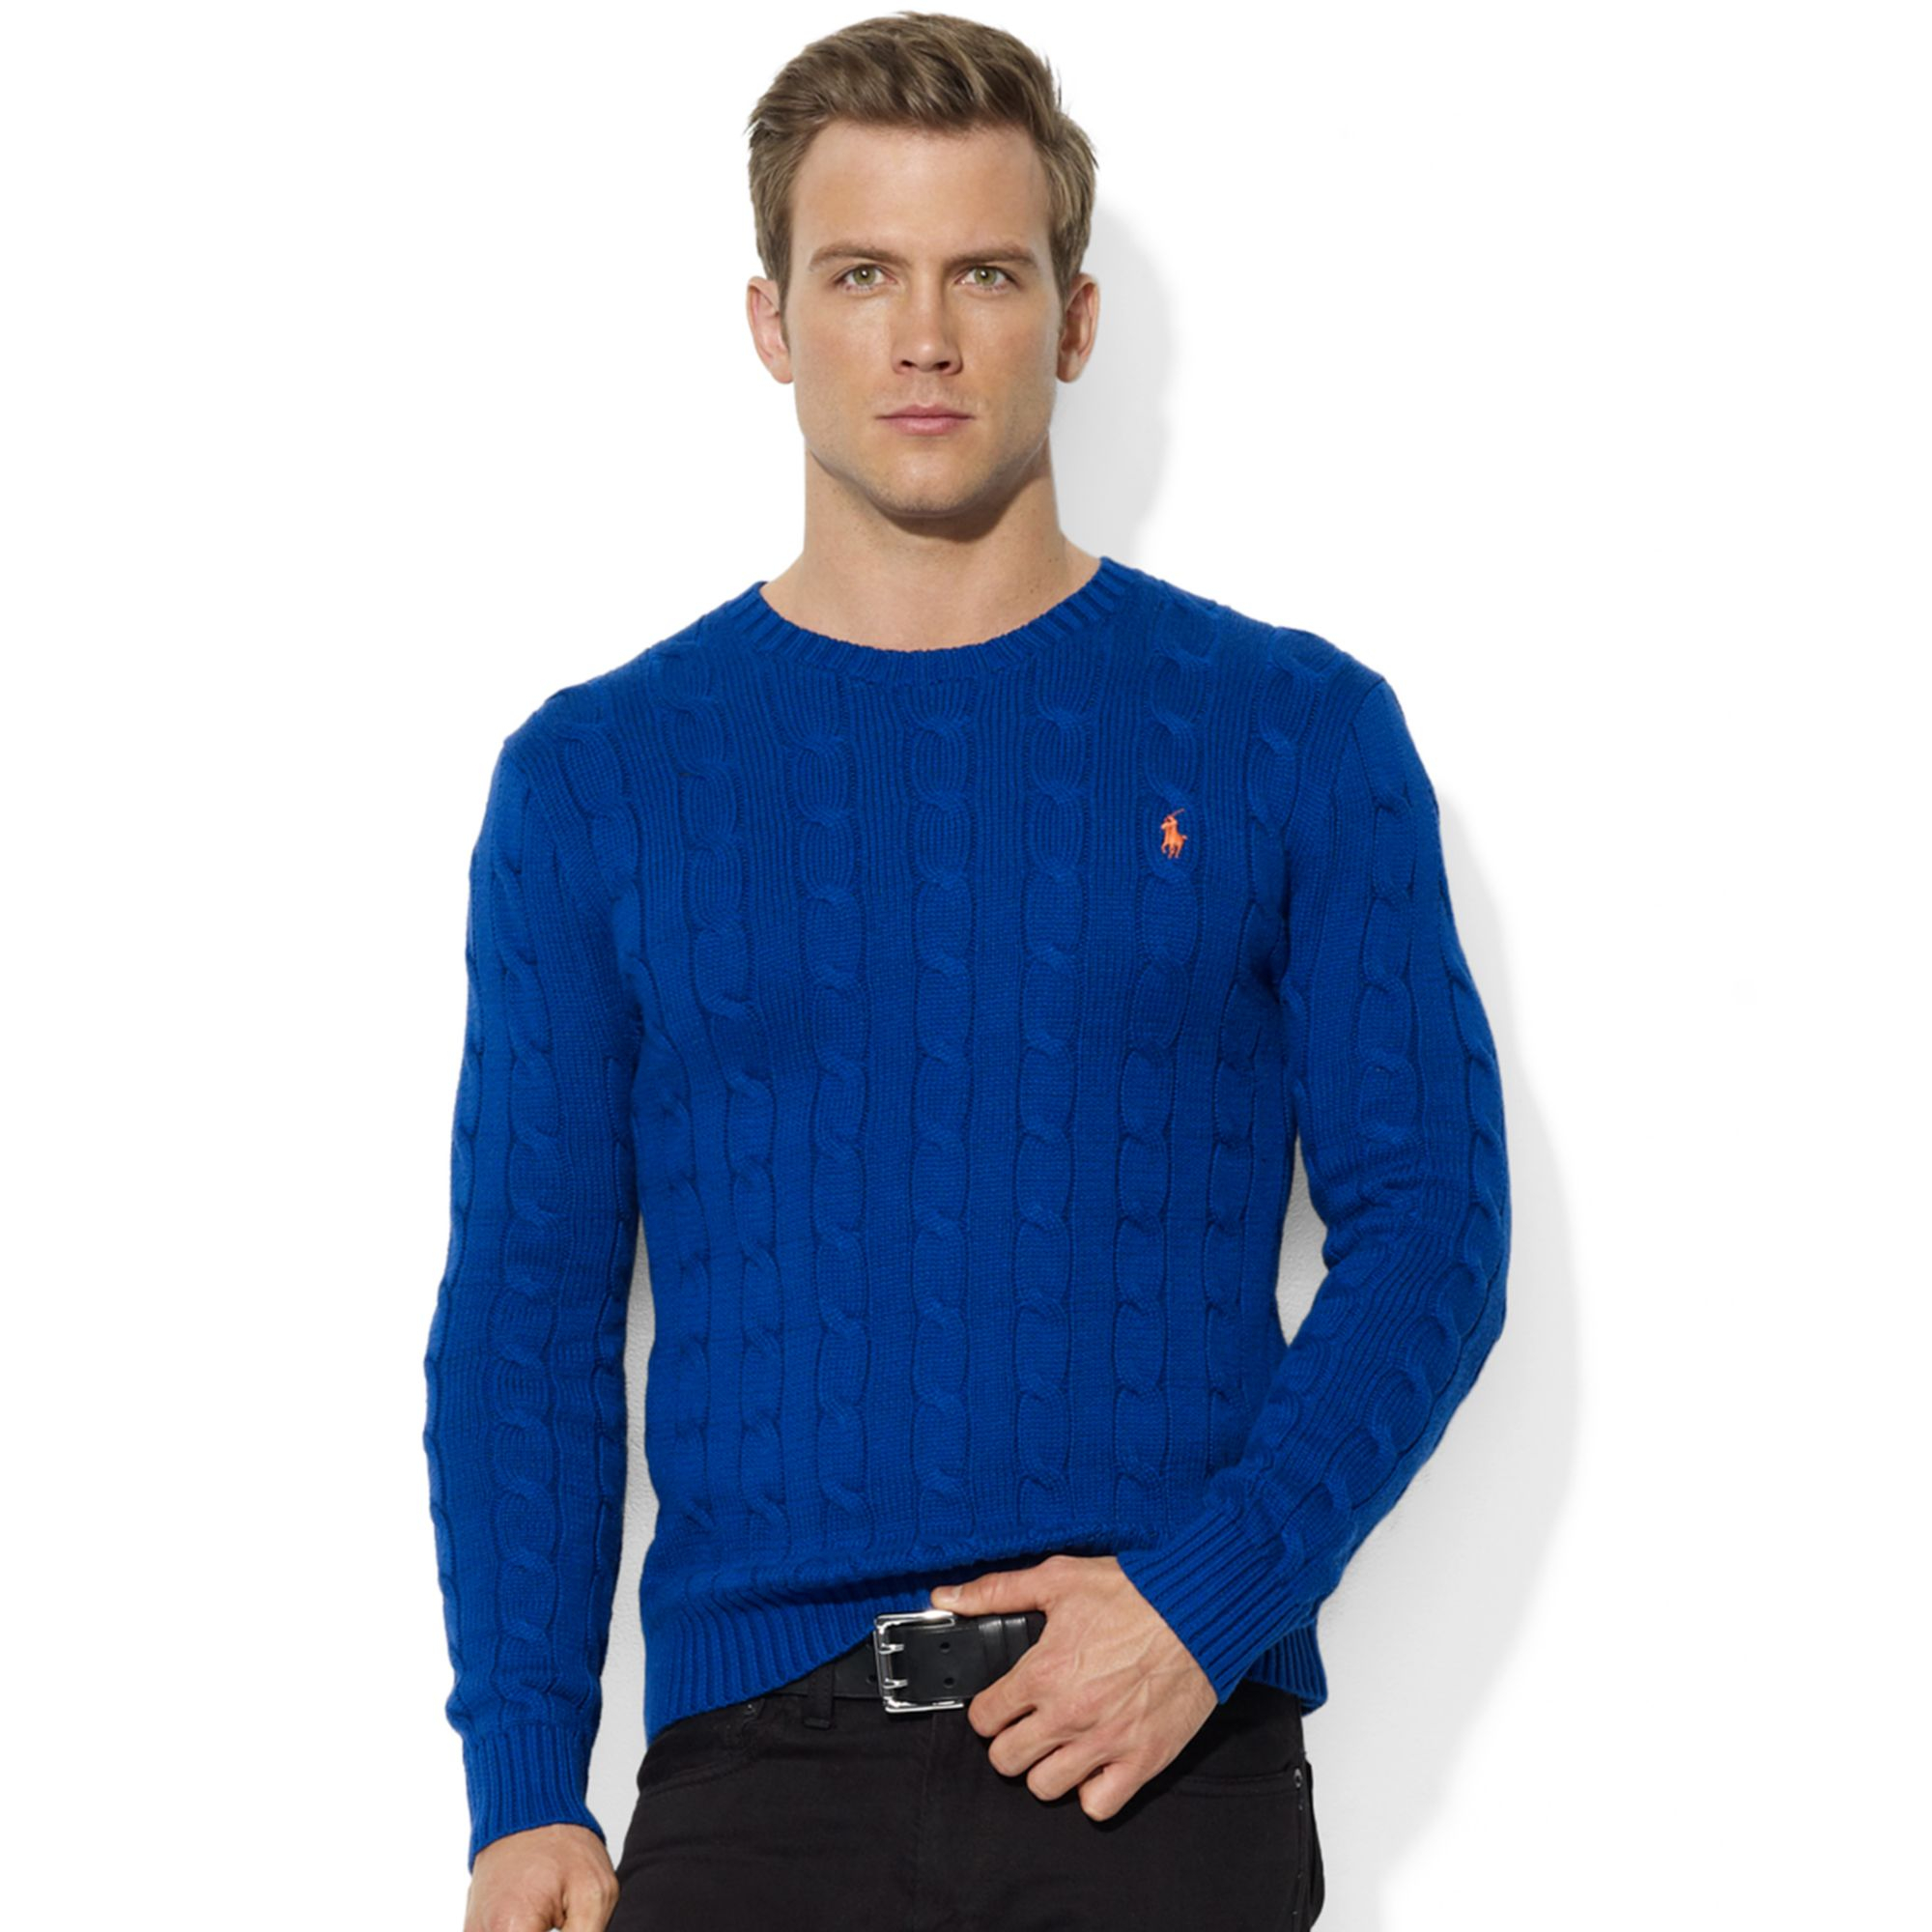 Lyst - Ralph Lauren Roving Crew Neck Cable Cotton Sweater in Blue for Men